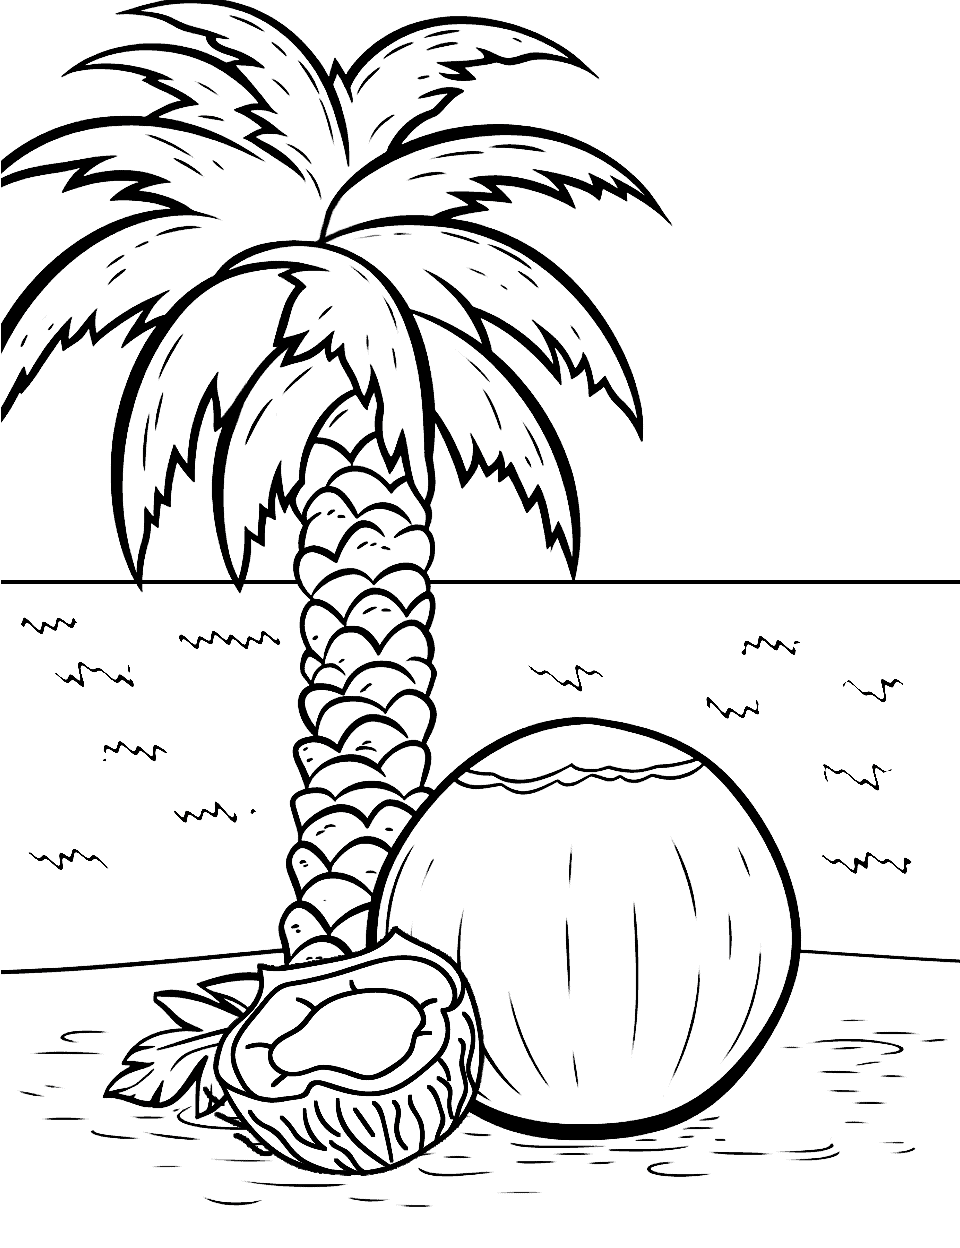 Coconut Beach Fruit Coloring Page - A giant coconut under a palm tree on a sandy beach.